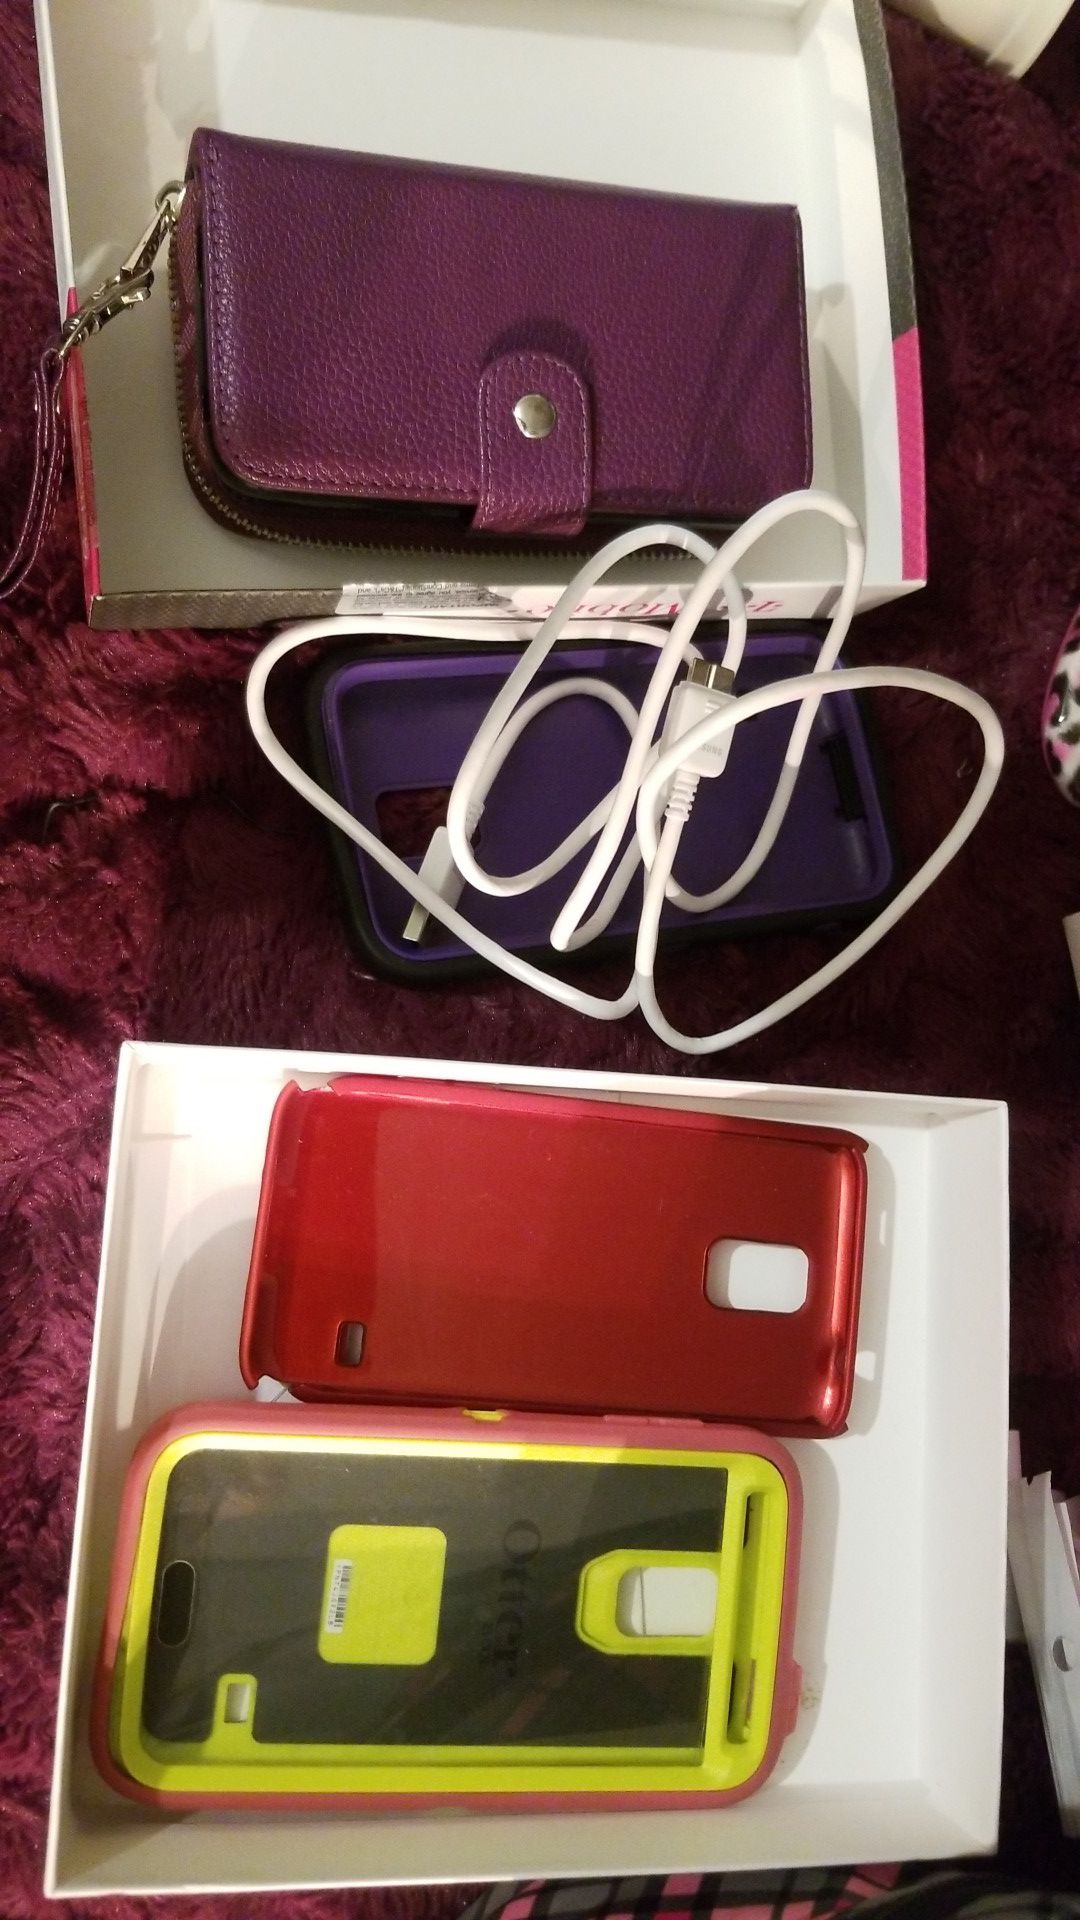 Samsung galaxy s5 cases and USB charger all free